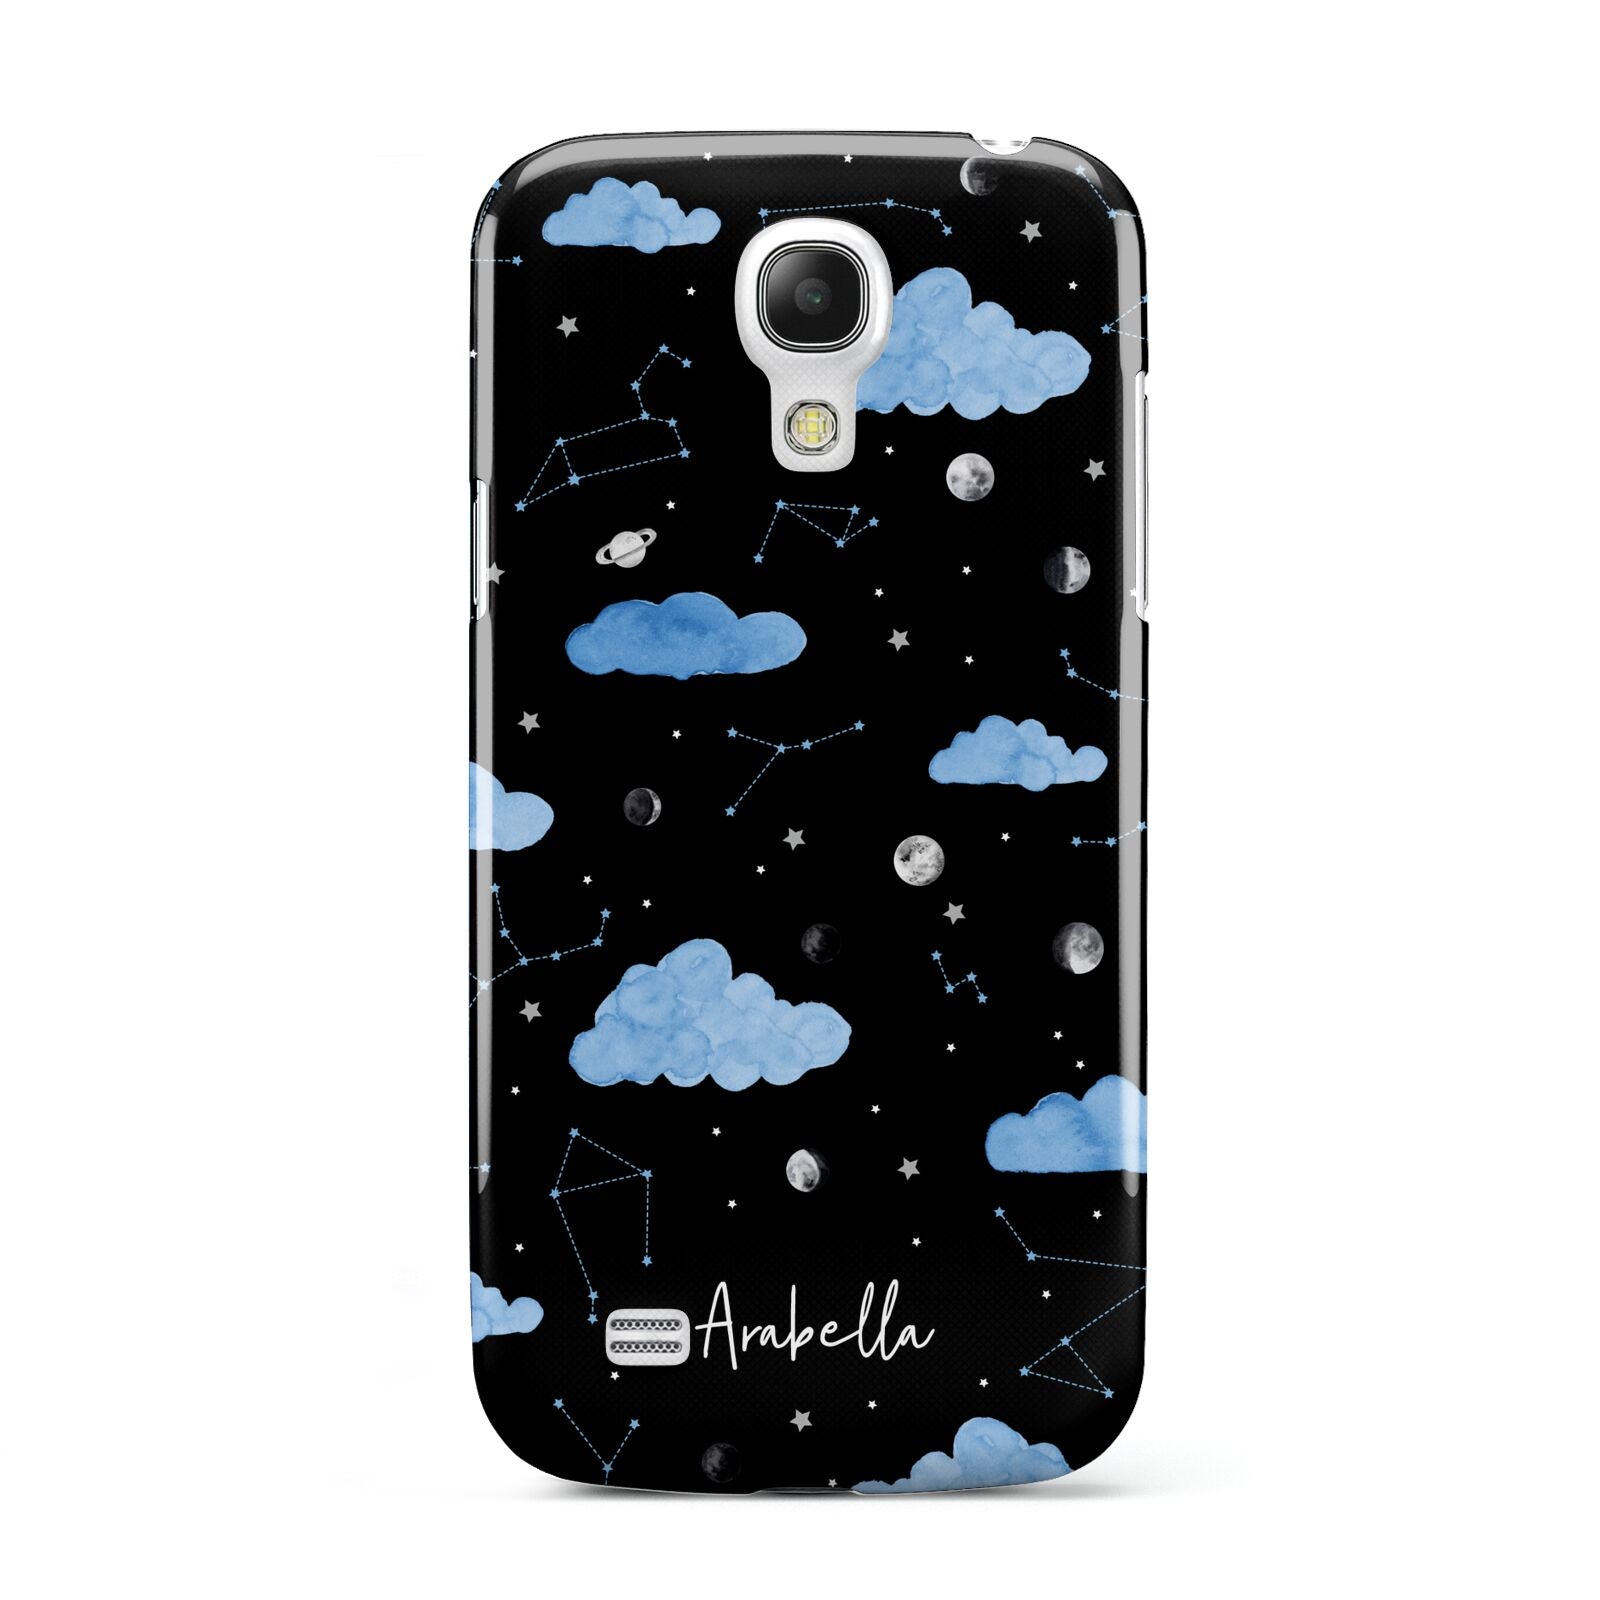 Cloudy Night Sky with Name Samsung Galaxy S4 Mini Case